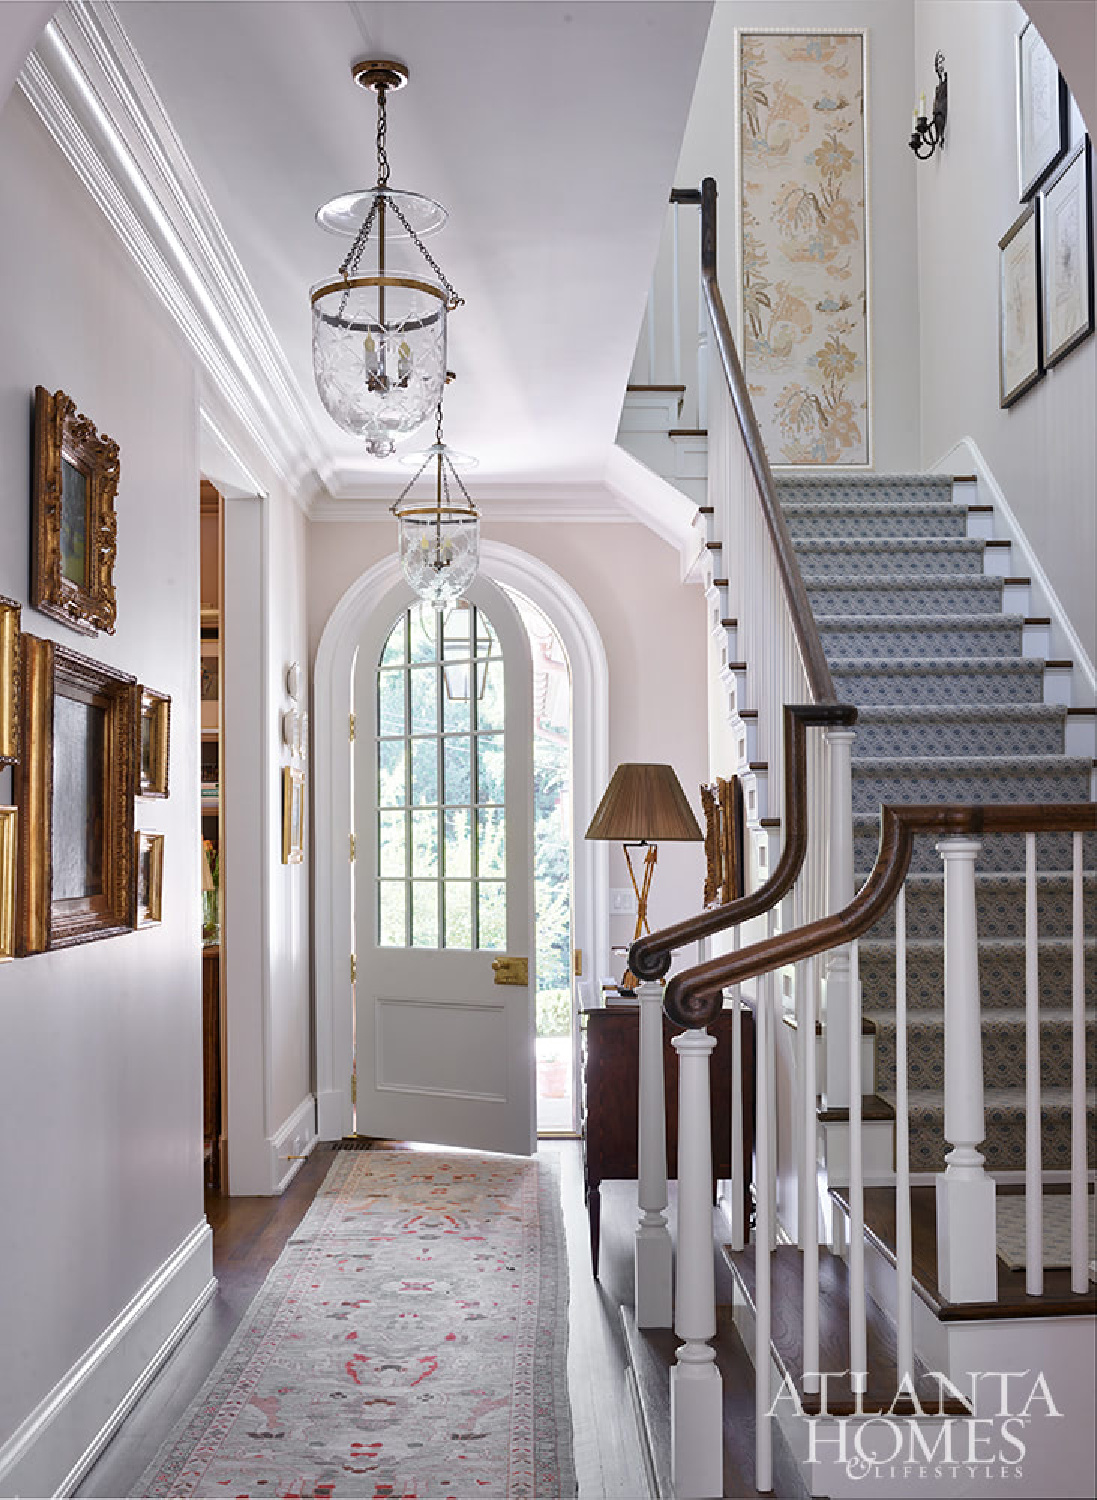 Carol Weaks designed entry and staircase in a traditional home - Atlanta Homes & Lifestyles (David Christensen). #staircasedesign #staircasedecor